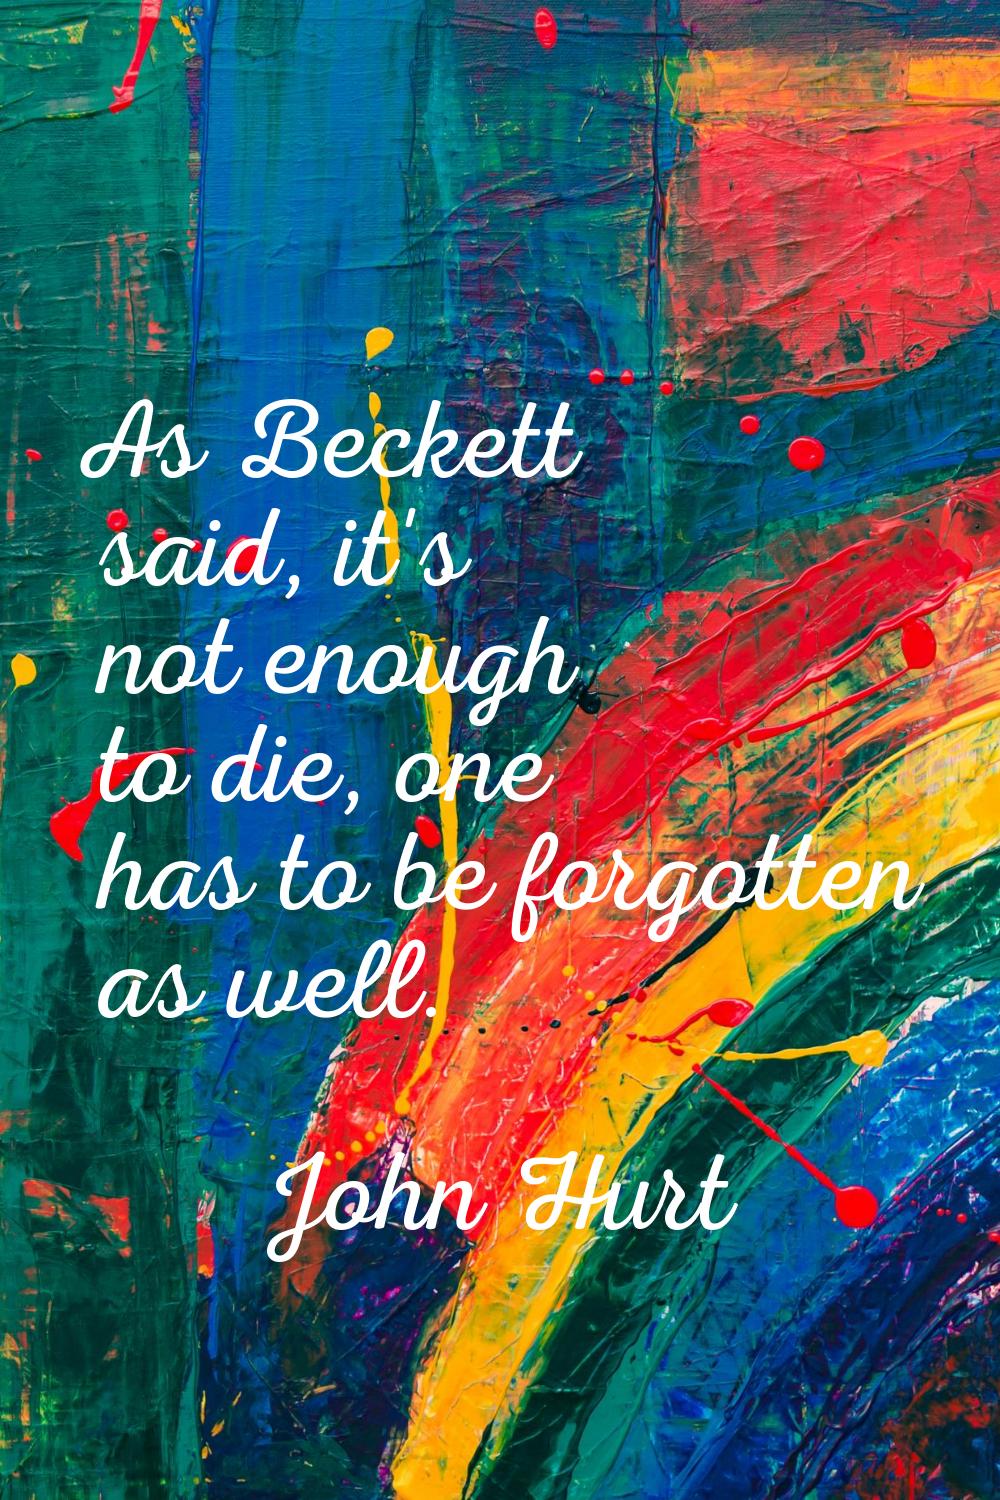 As Beckett said, it's not enough to die, one has to be forgotten as well.